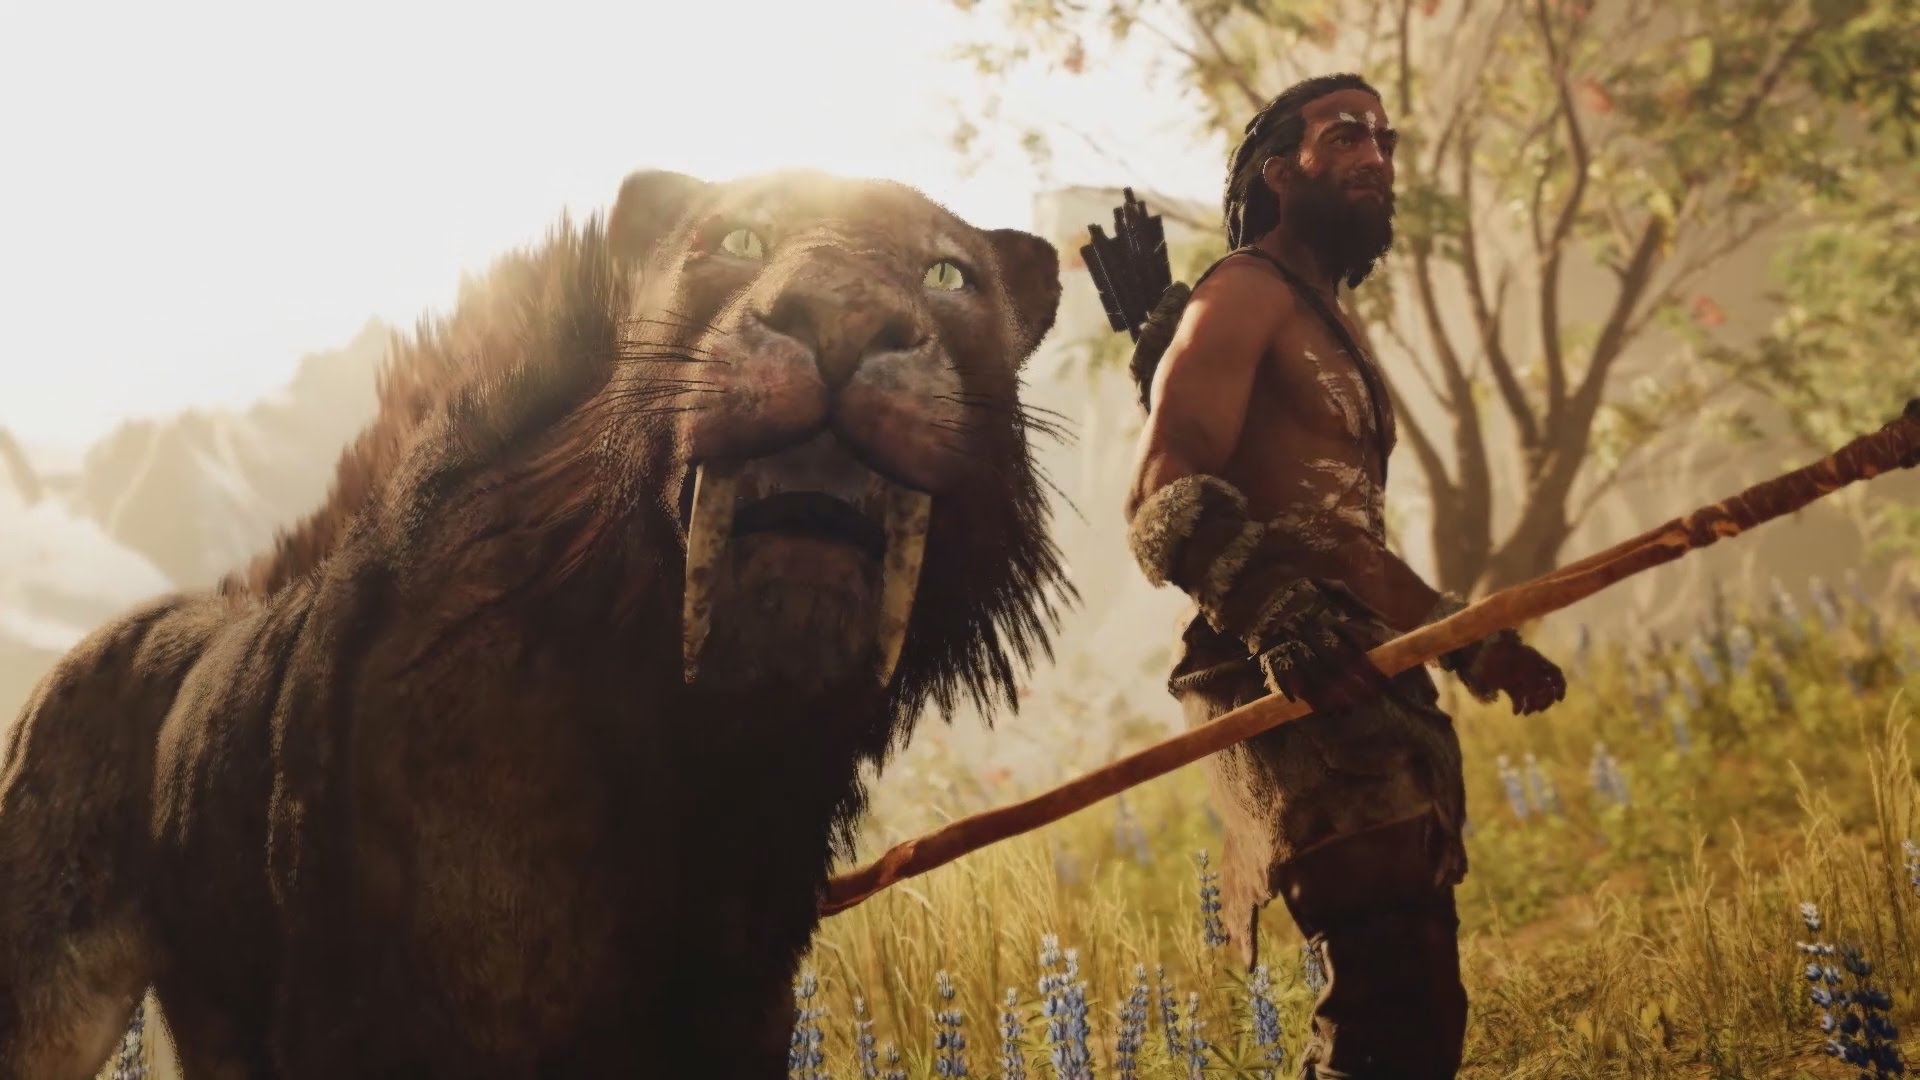 REVEALED: “Far Cry Primal” 101 Trailer - Are you prepared to rise above extinction?